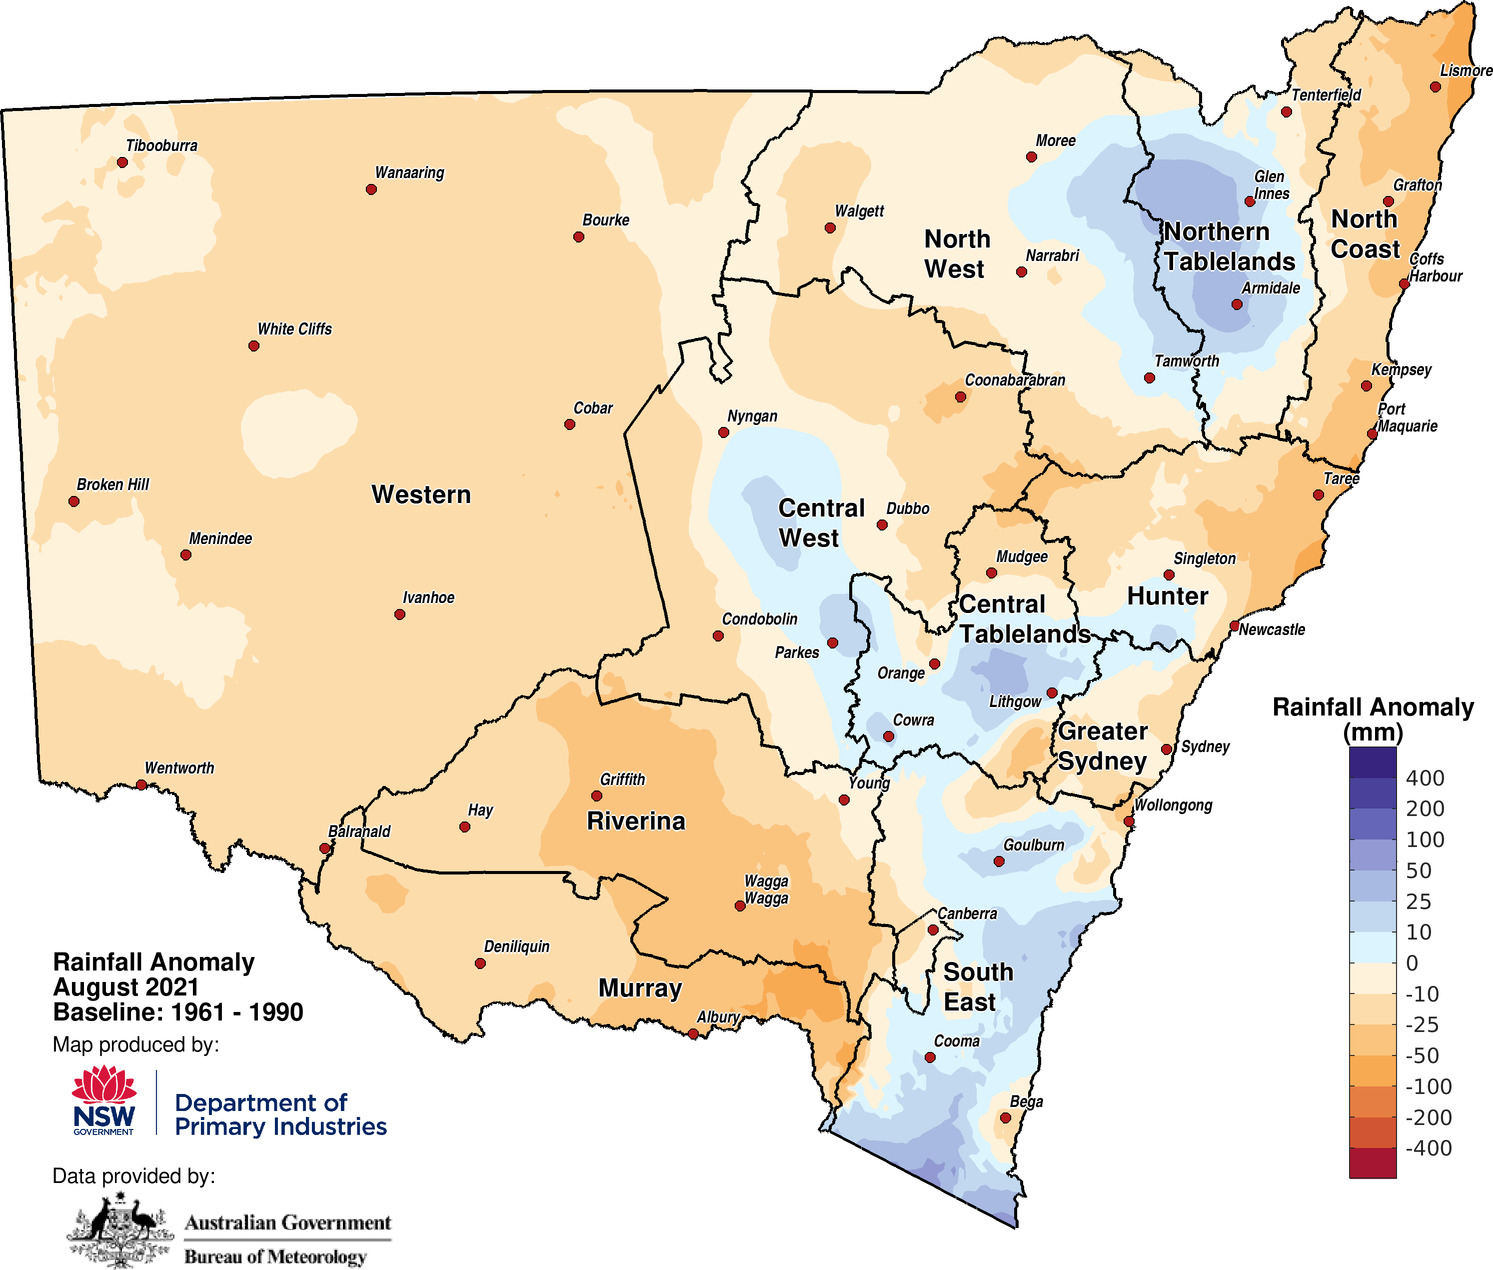 Rainfall anomaly – August 2021